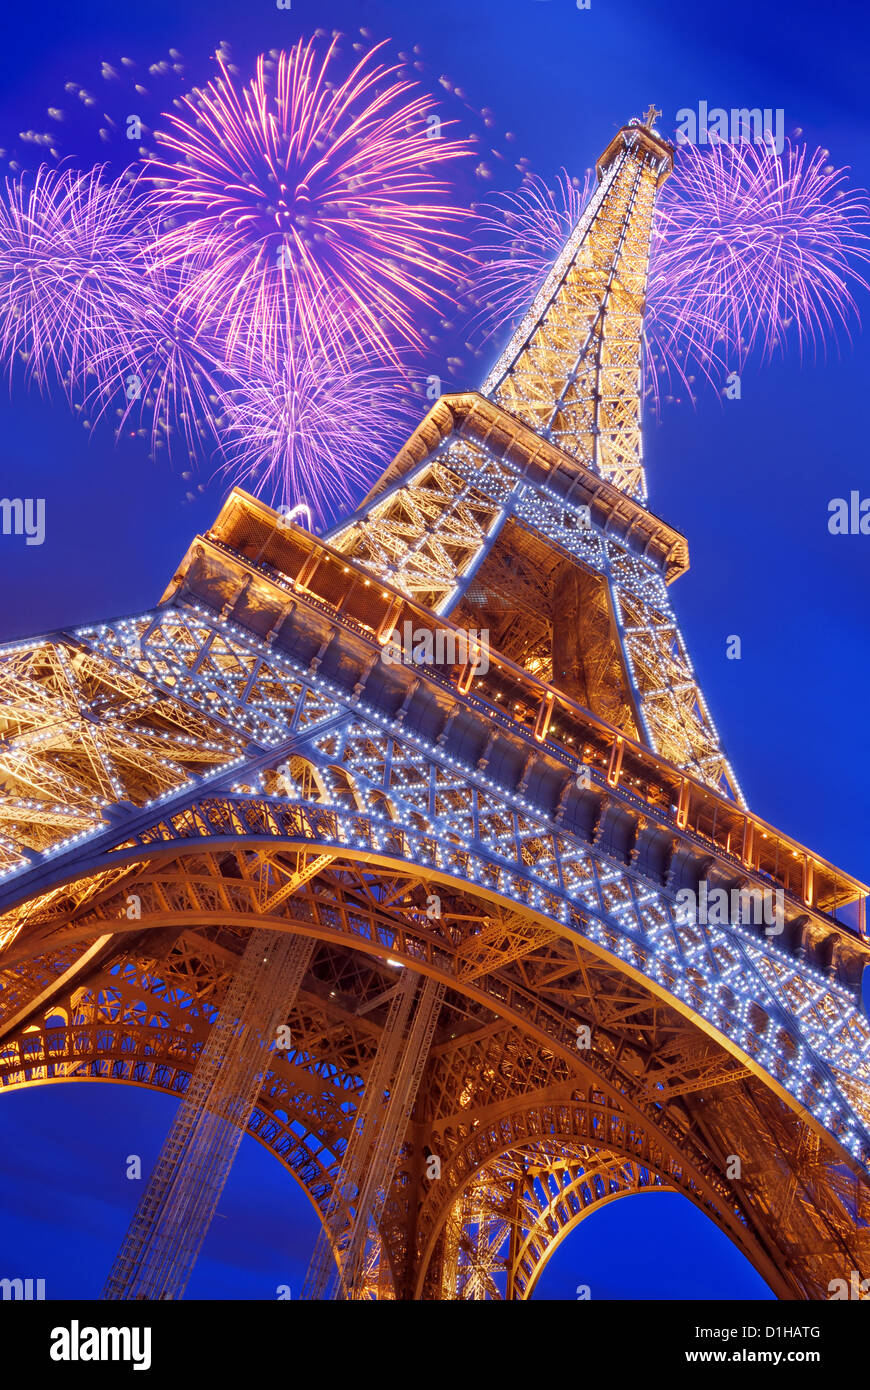 The Eiffel Tower from below upwards in the evening in Paris, France. Stock Photo